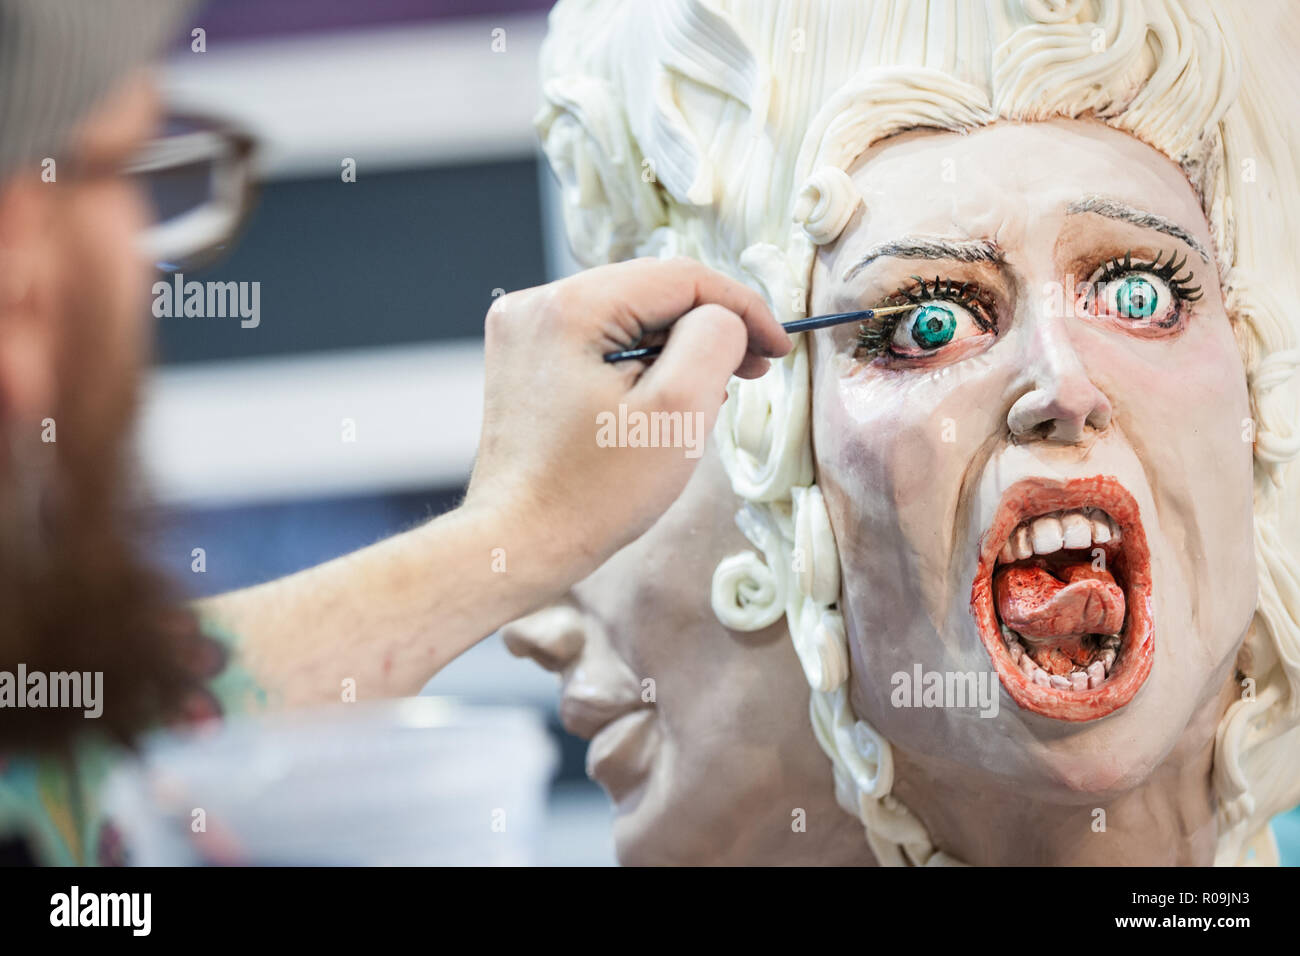 Birmingham, UK. 3rd Nov, 2018. The Greatest Cake Show by Chocolate Magic at Cake International at the NEC In Birmingham where people can come and see cakes from amatuer to proffesional cake makers and can buy all their cake needs Credit: steven roe/Alamy Live News Stock Photo